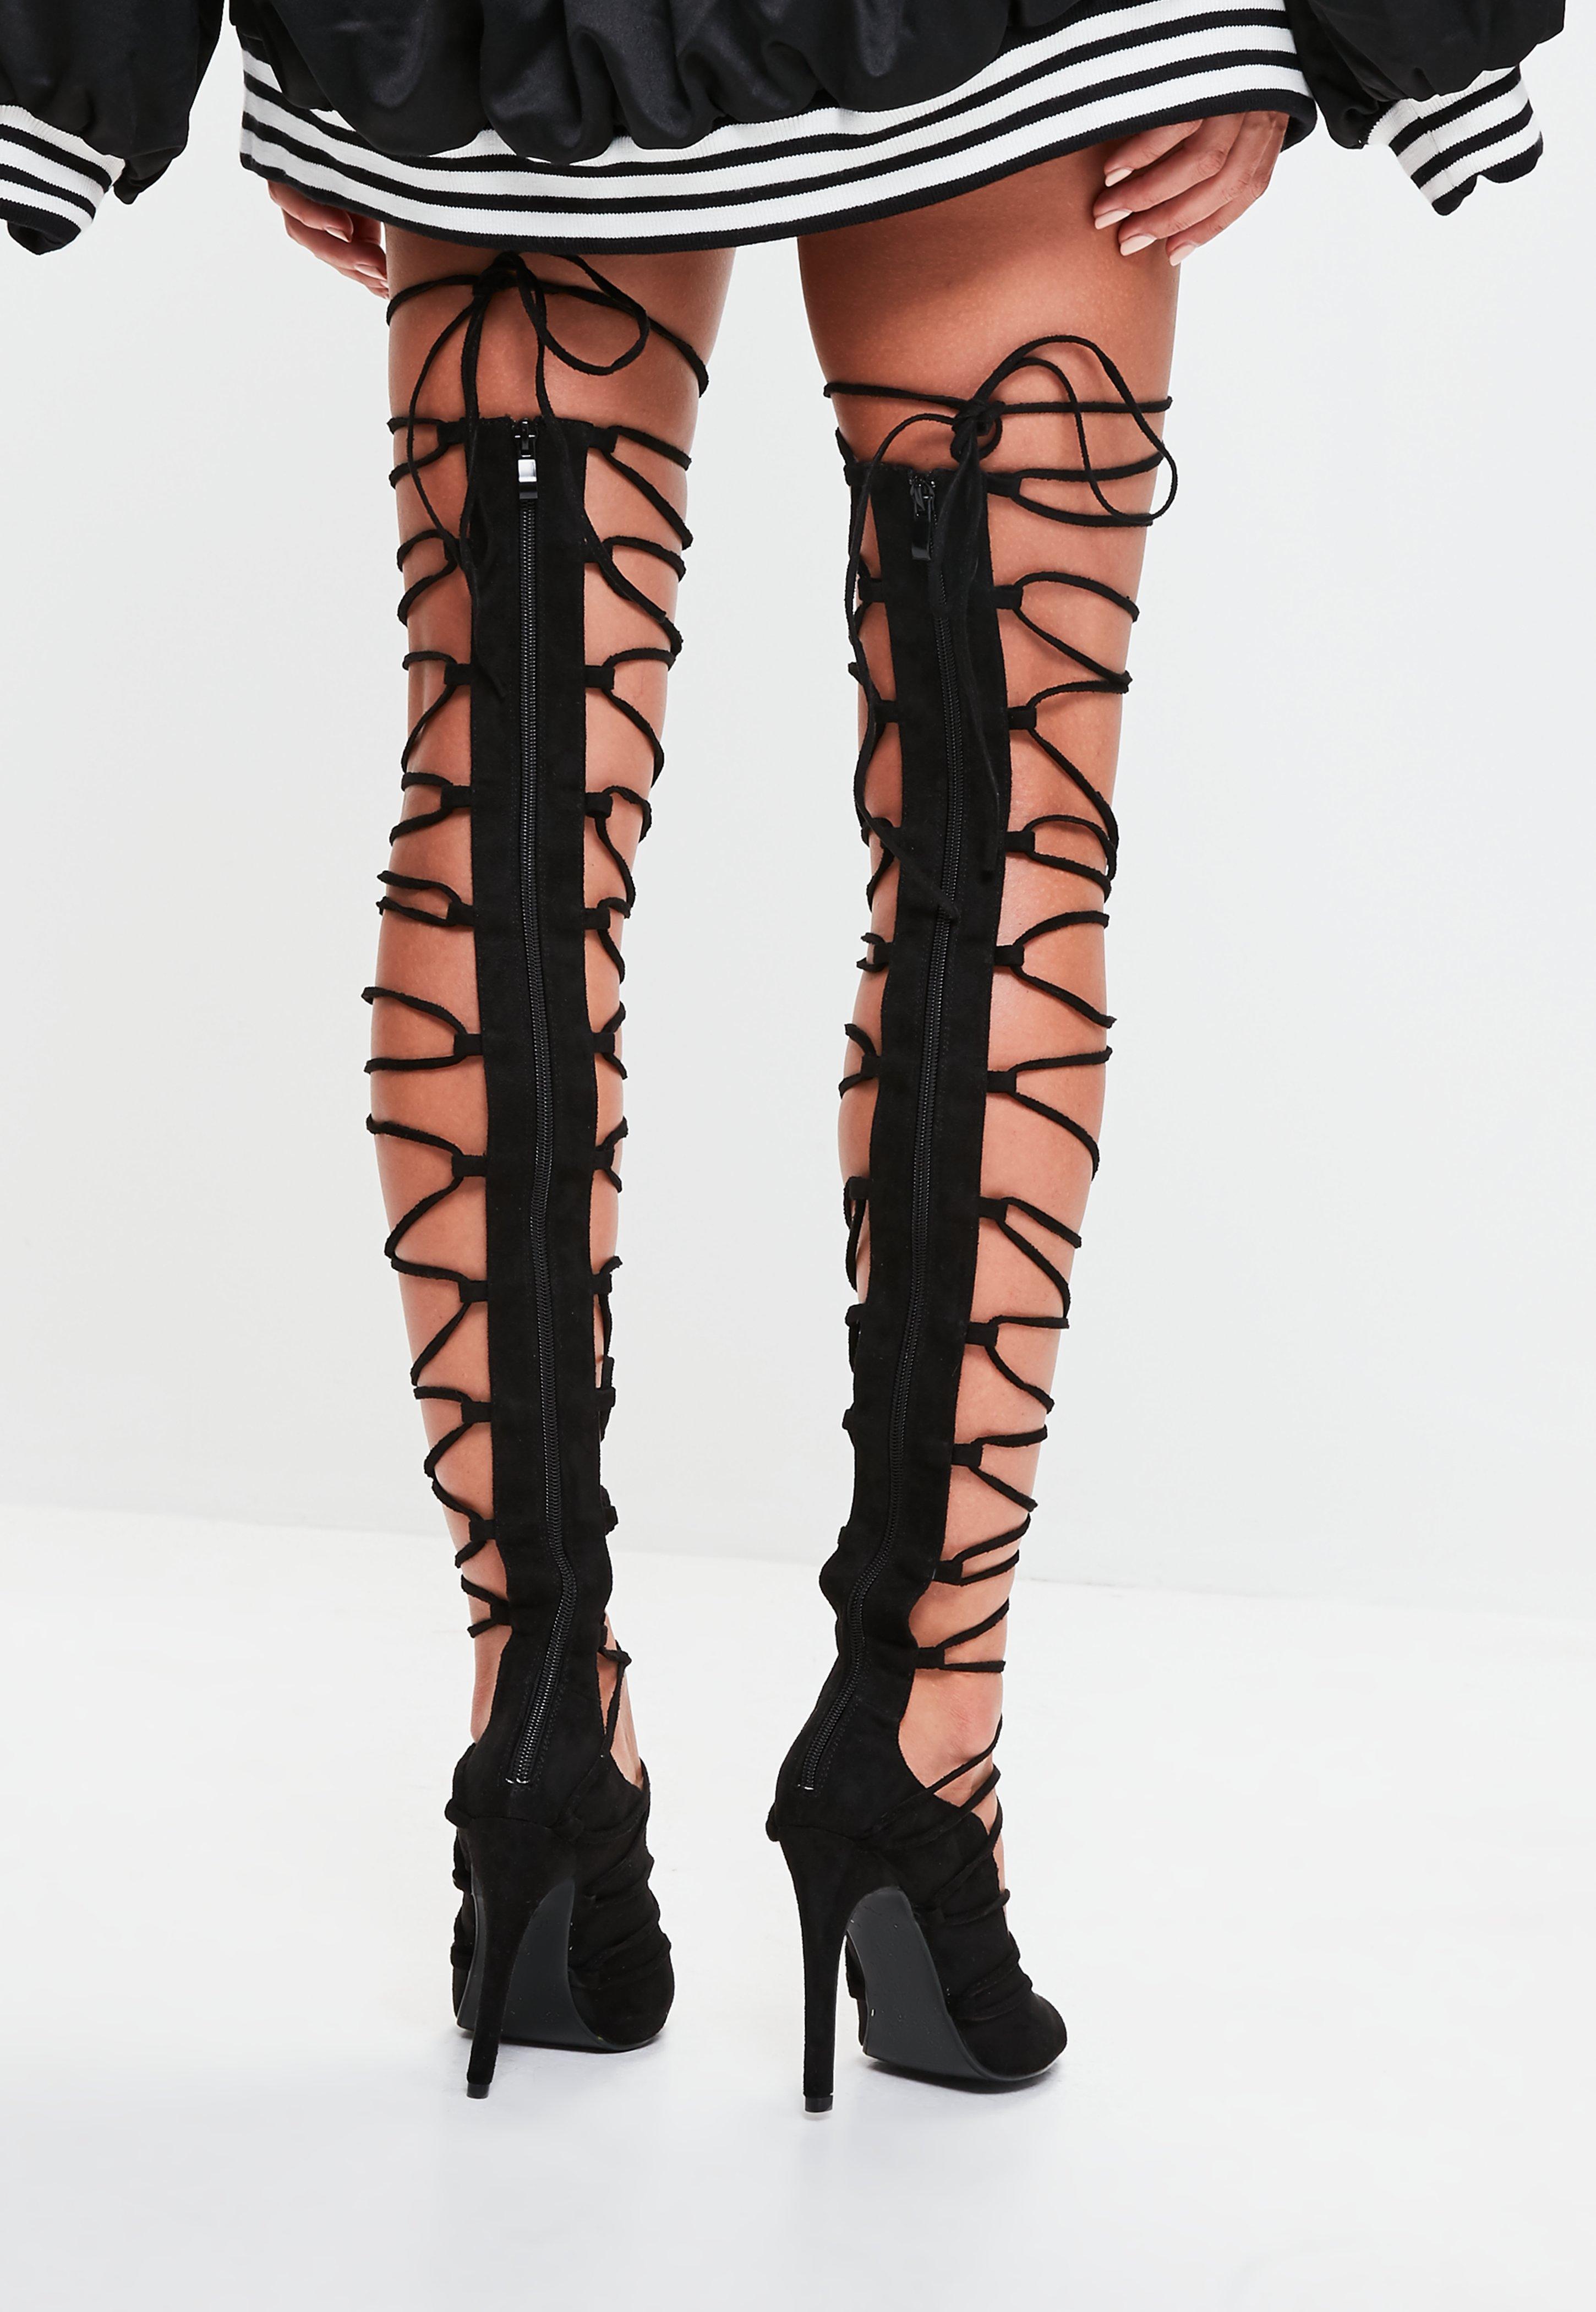 lace up knee high gladiator sandal boots online